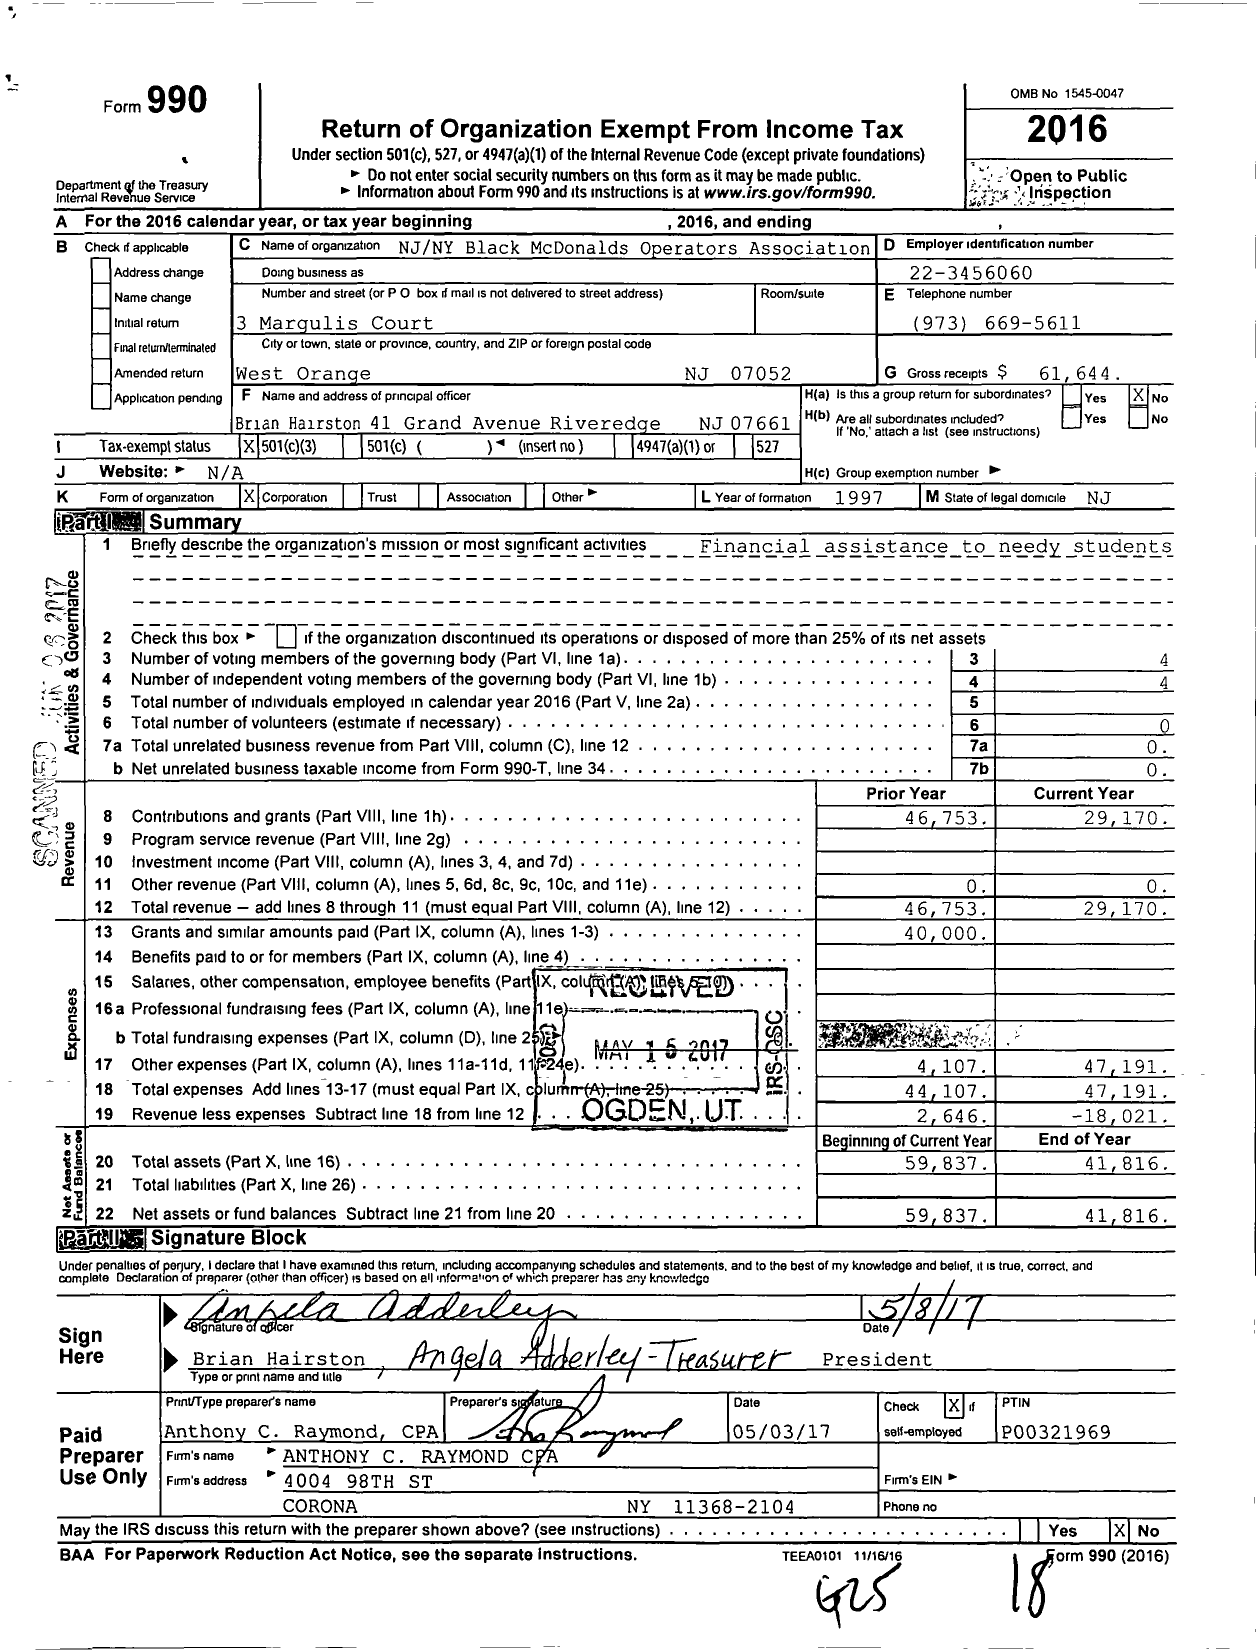 Image of first page of 2016 Form 990 for Nynj Black Mcdonalds Operators Association